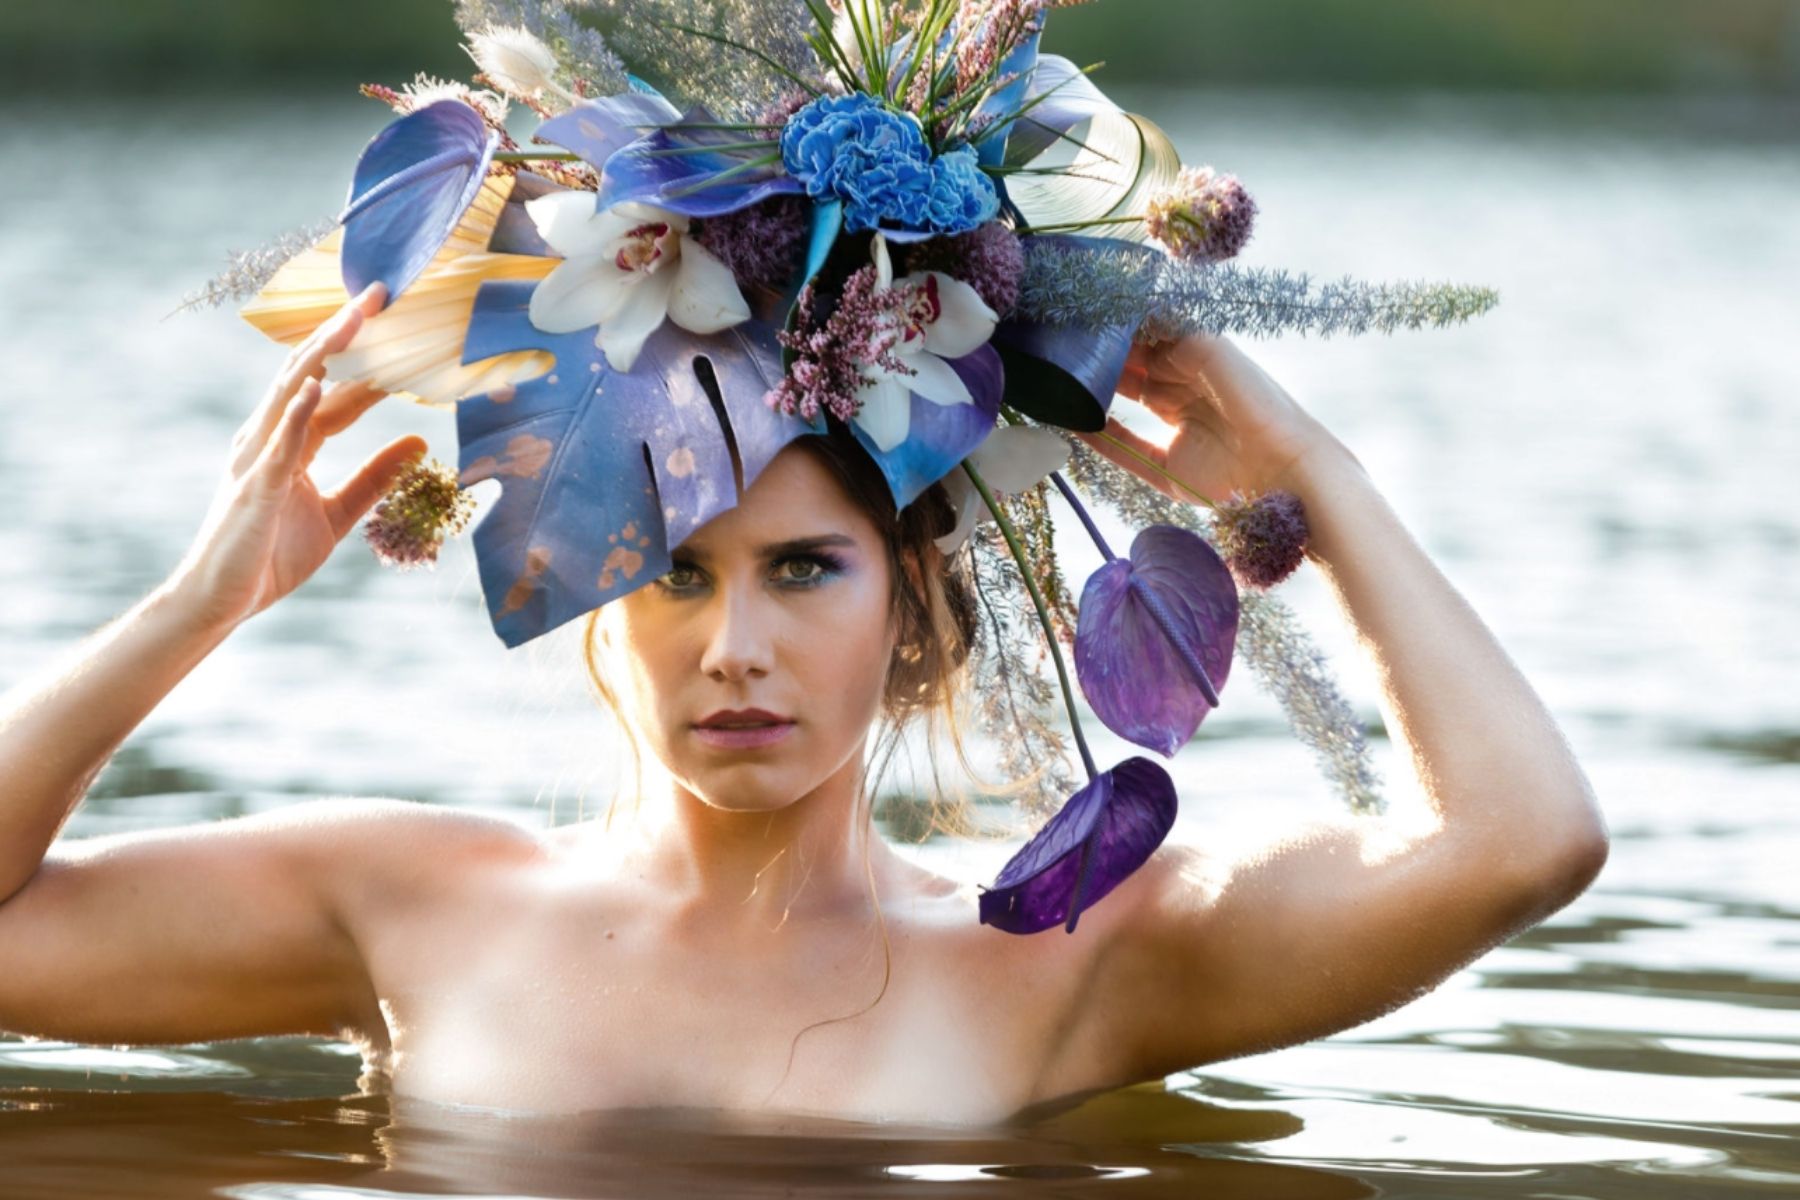 Floral Design Headpiece by Ace Berry - Photo by @indigoblue_photography - On Thursd